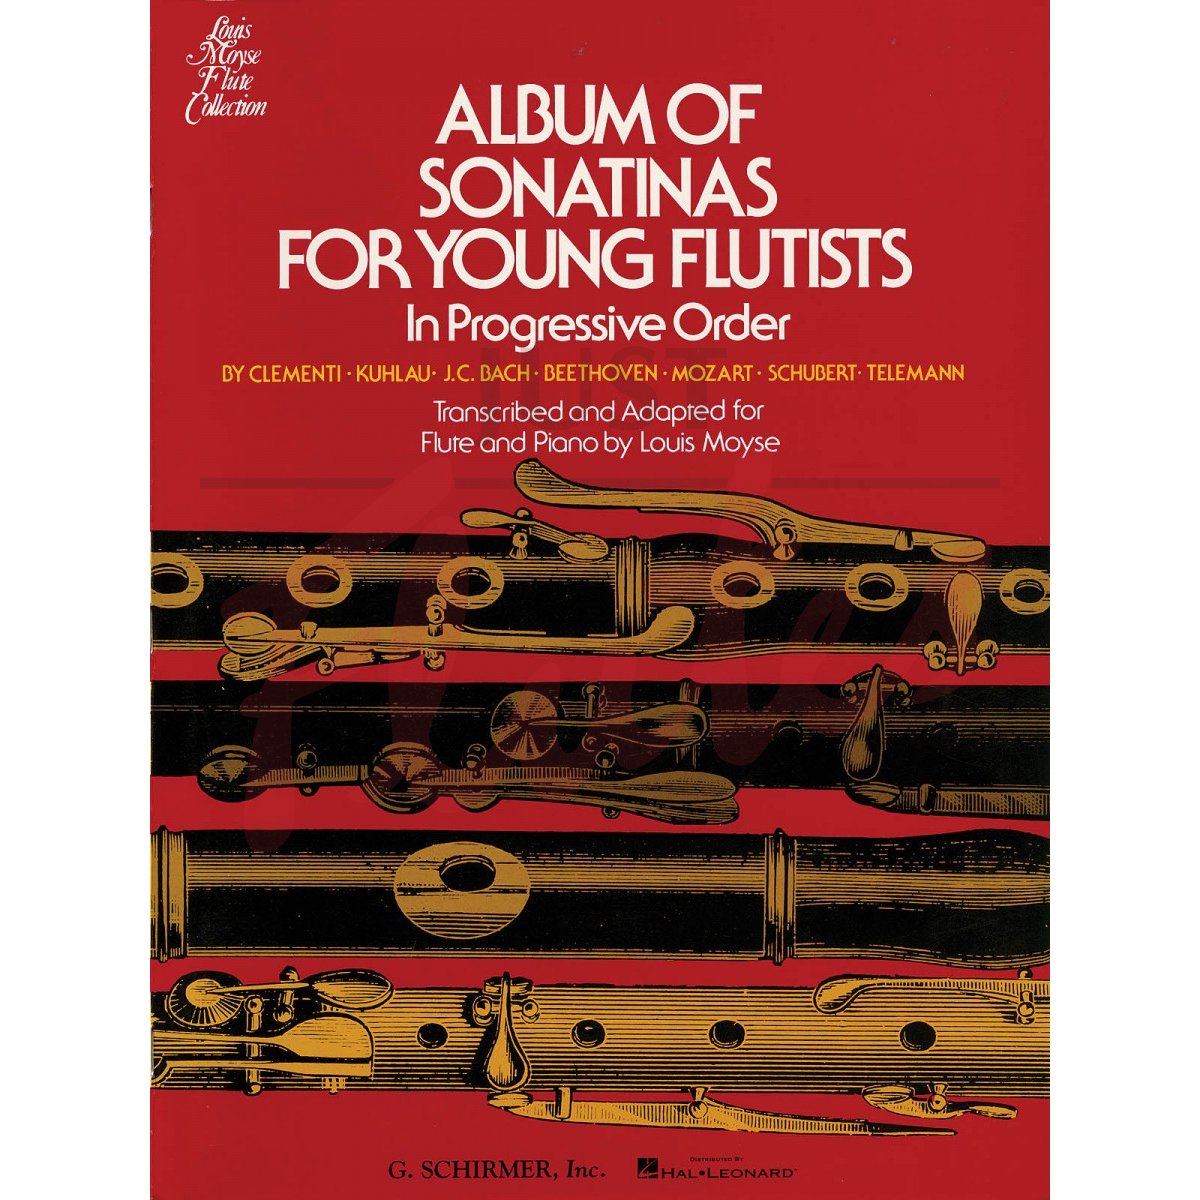 Album of Sonatinas for Young Flutists in Progressive Order for Flute and Piano